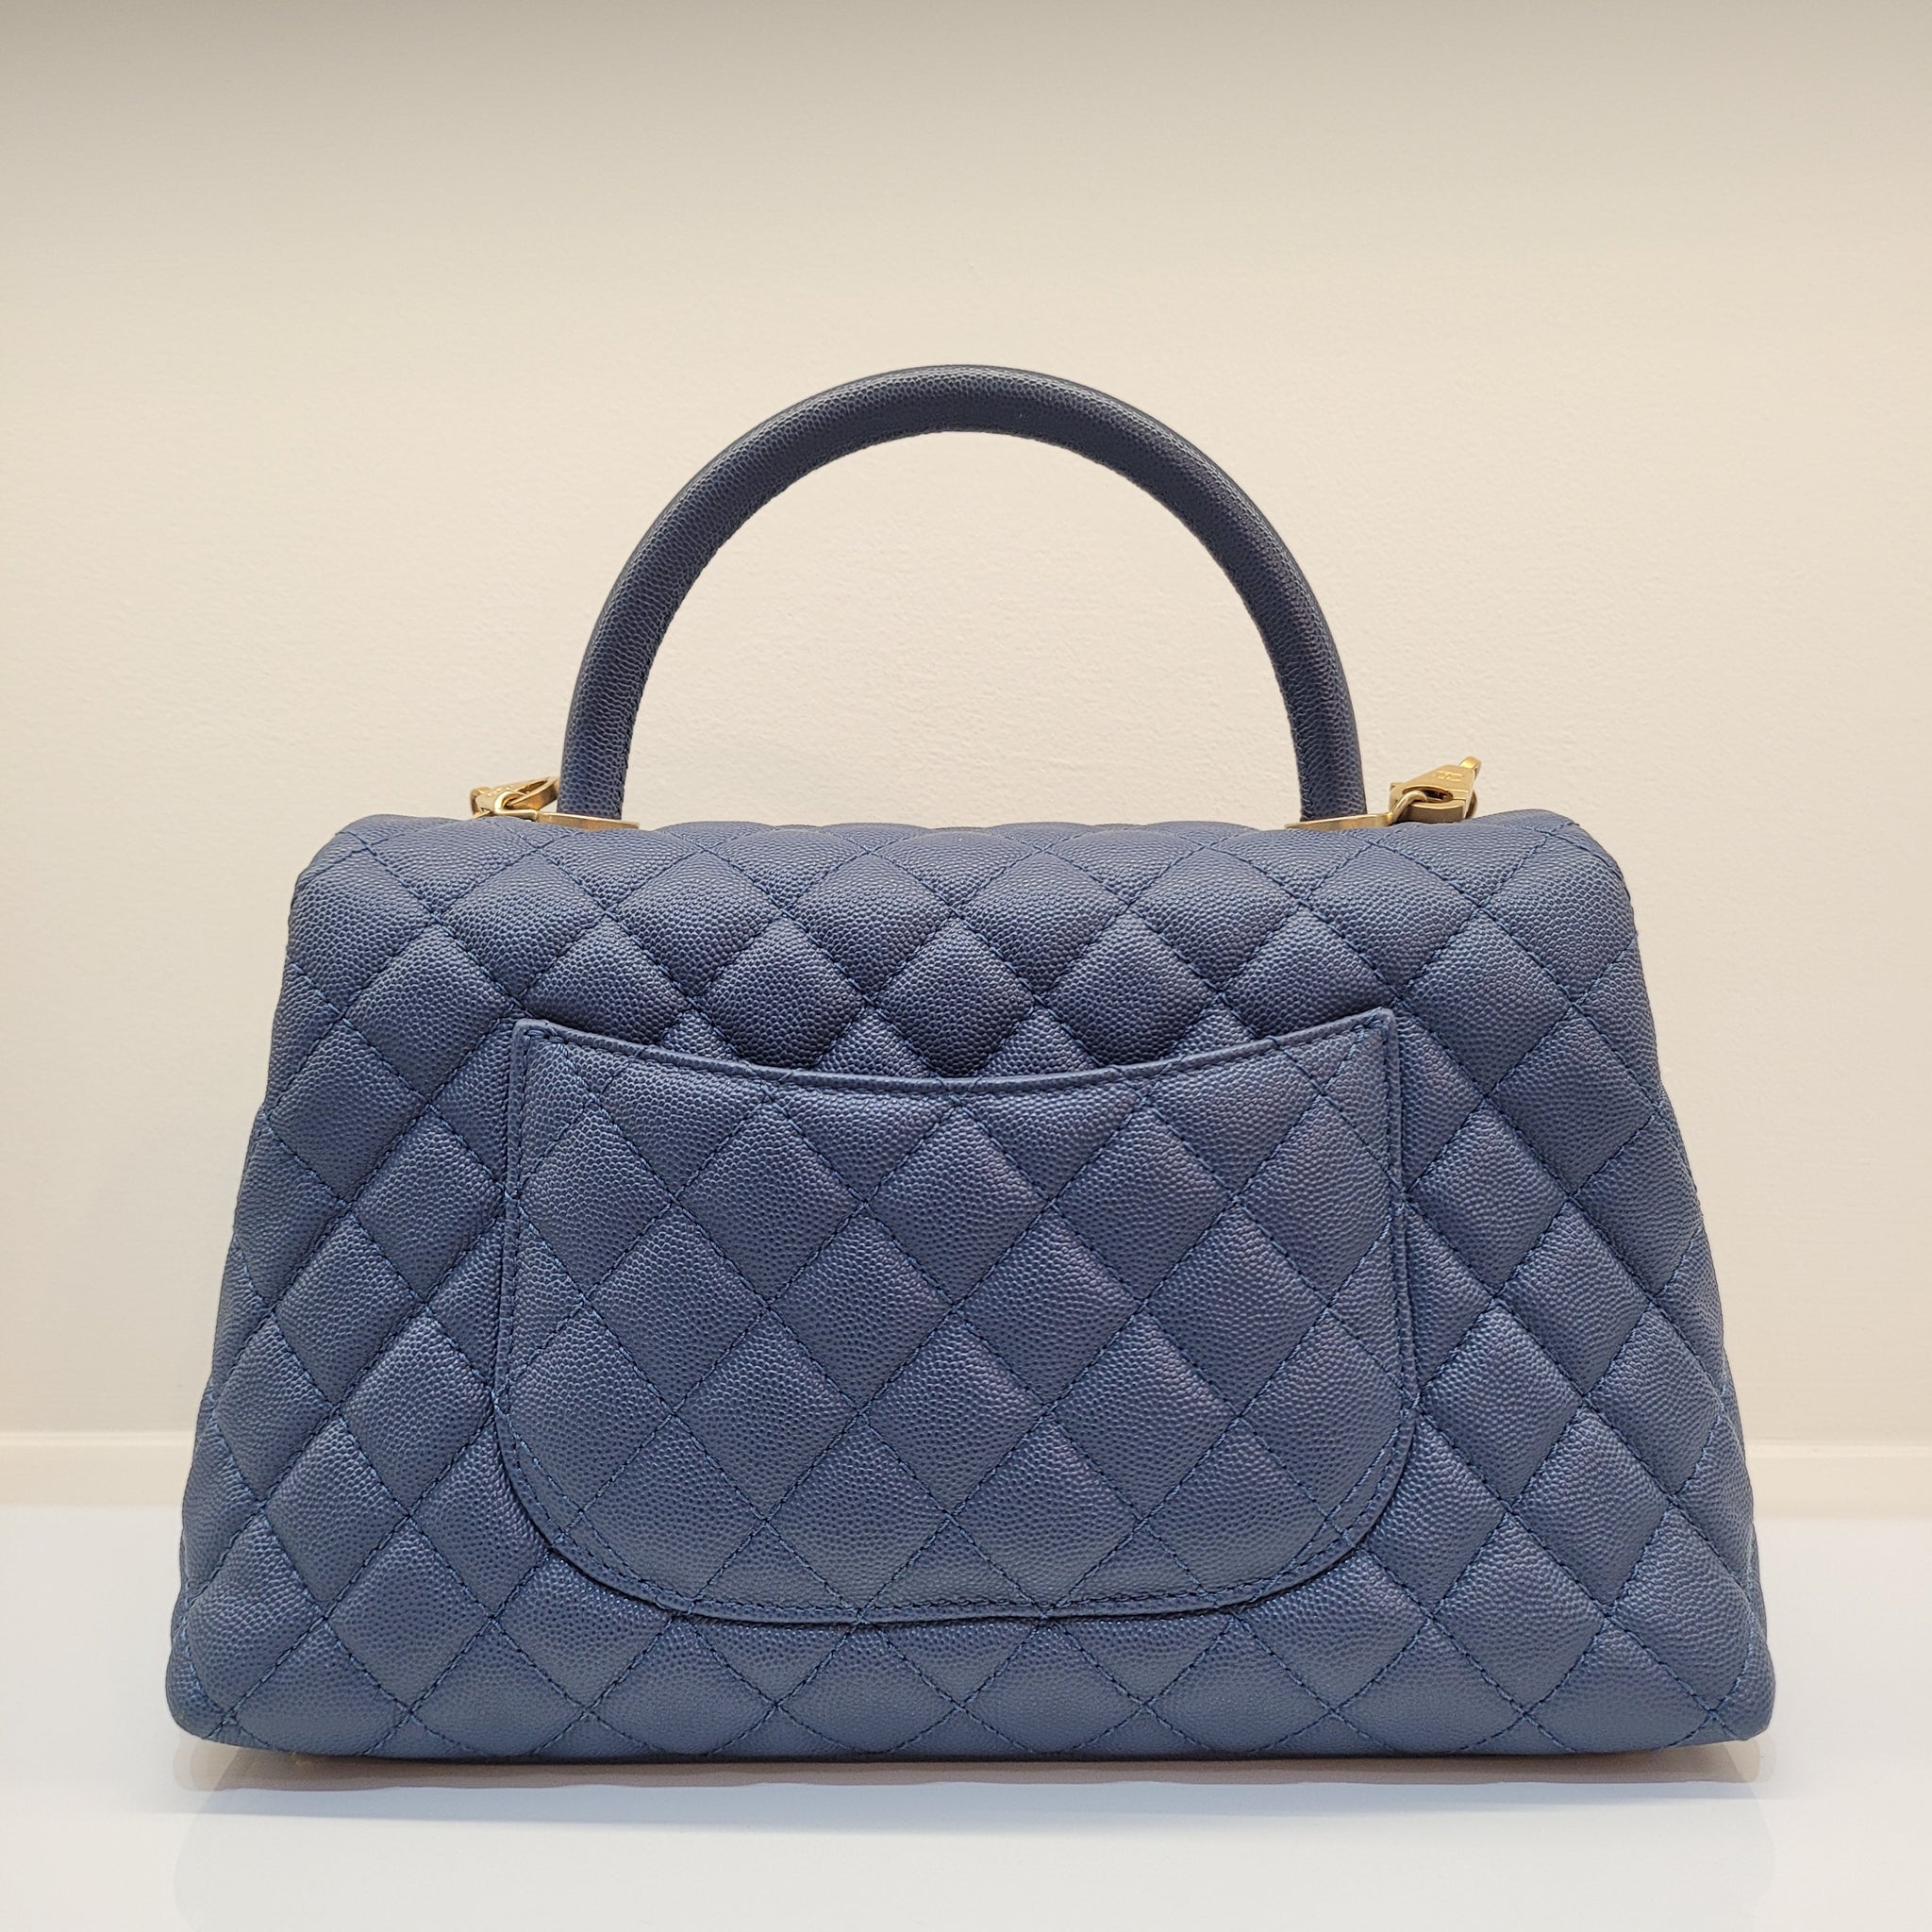 Coco handle leather handbag Chanel Blue in Leather - 35247780